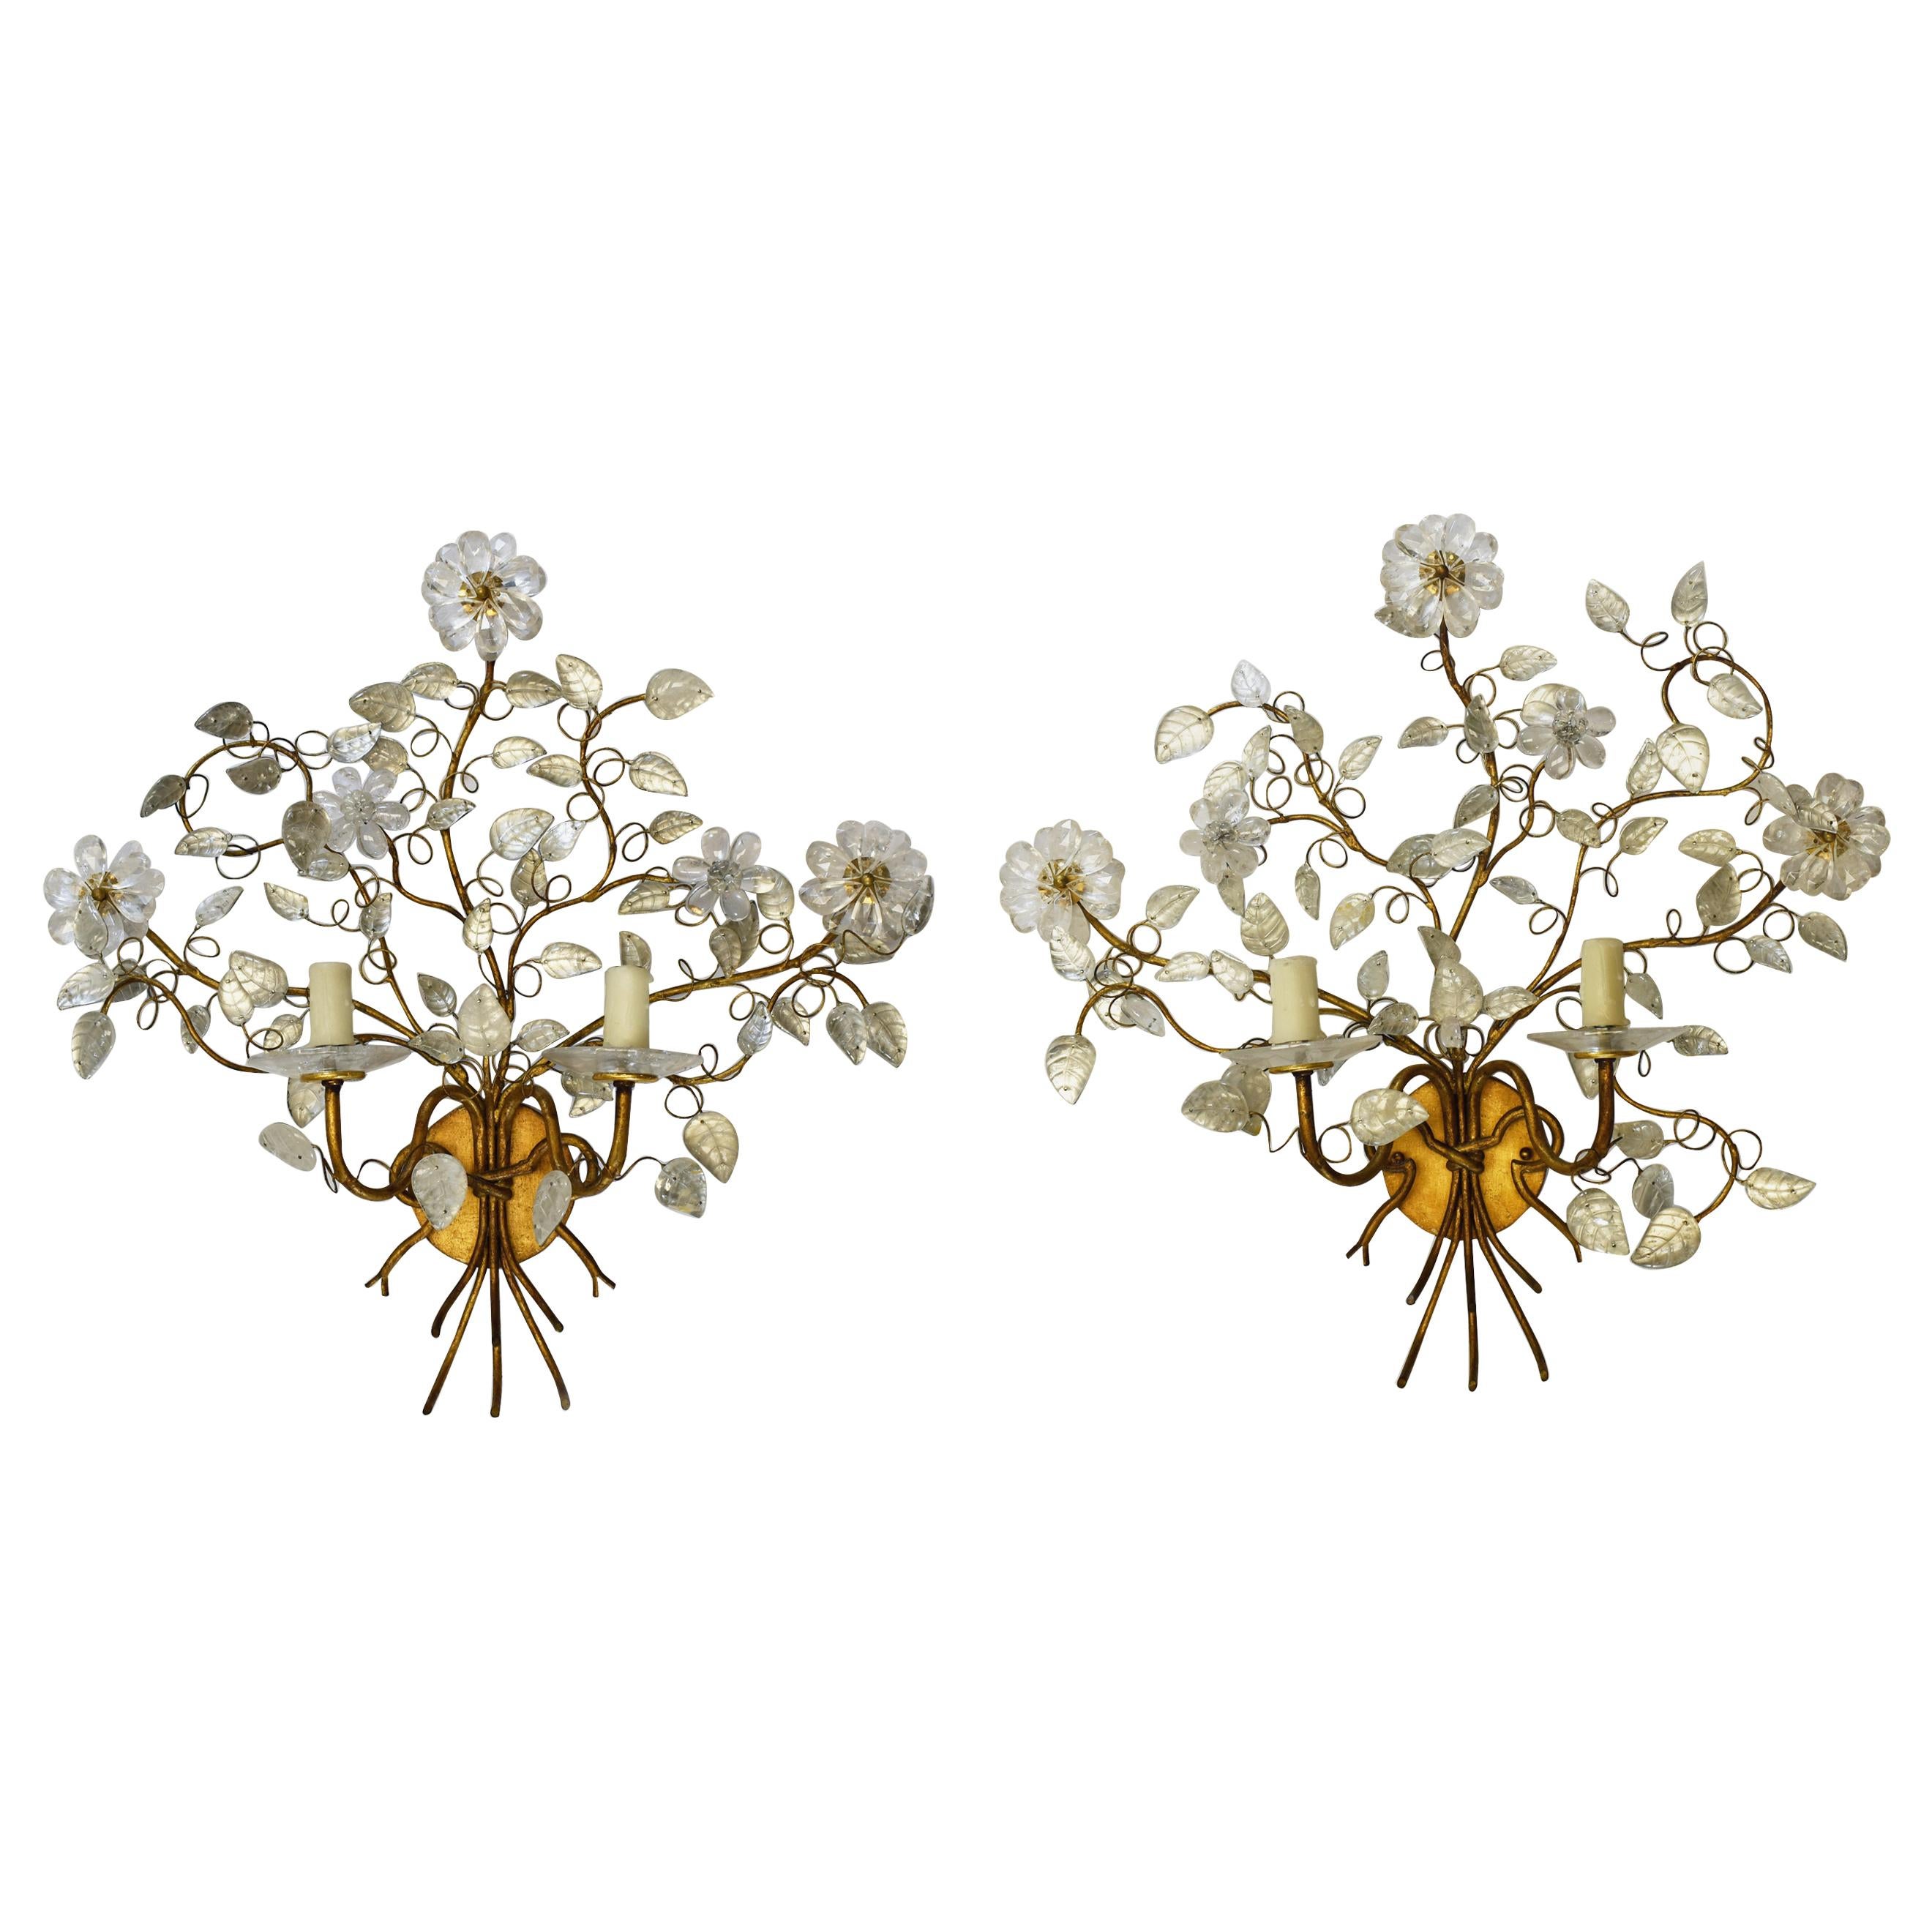 Pair of Modern Style Rock Crystal Floral Sconces